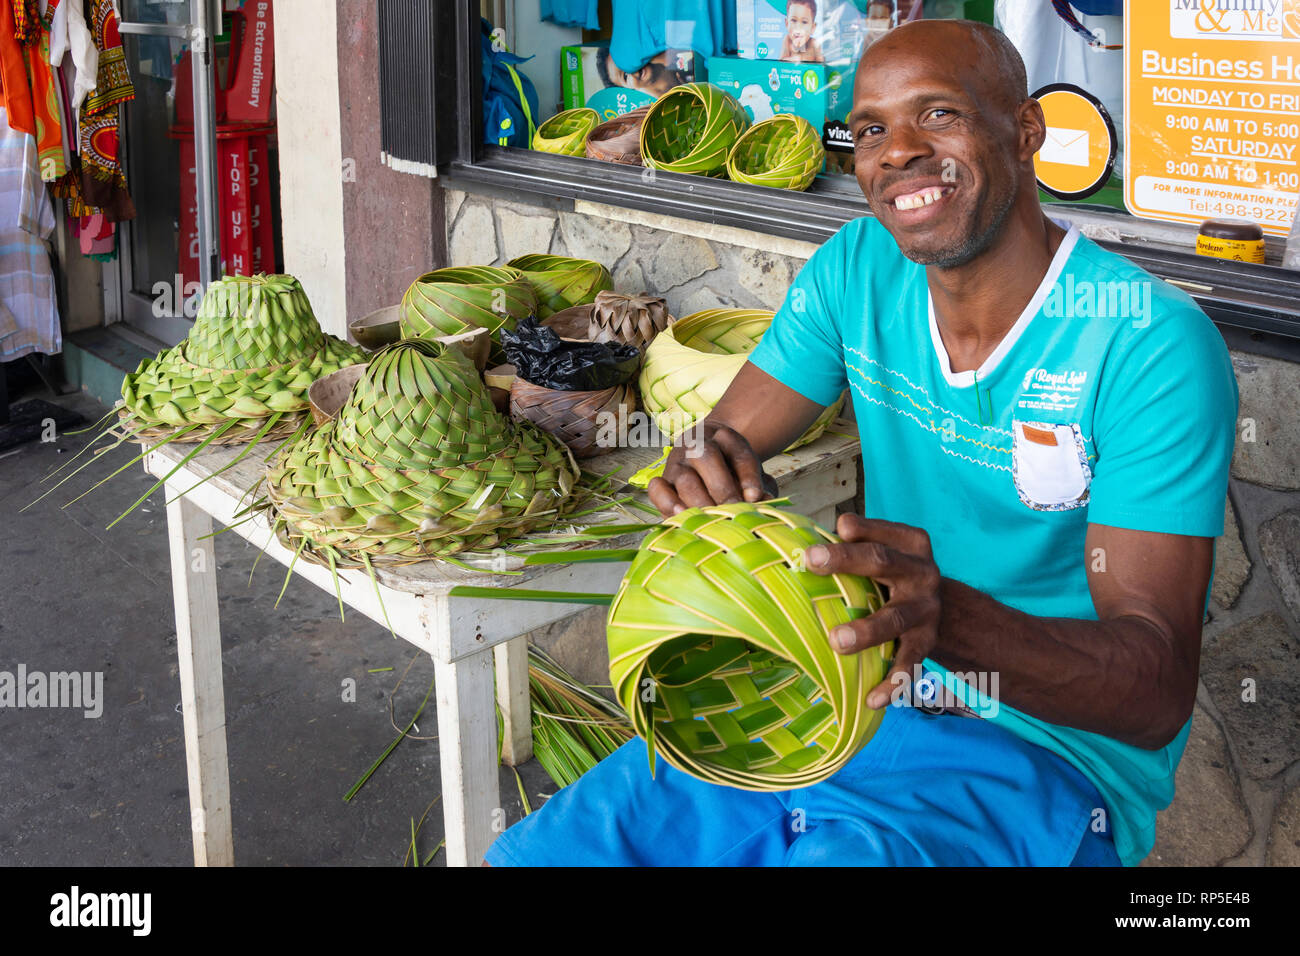 Local man making straw hats and bowls, Upper Bay Street, Kingston, Saint Vincent and the Grenadines, Lesser Antilles, Caribbean Stock Photo